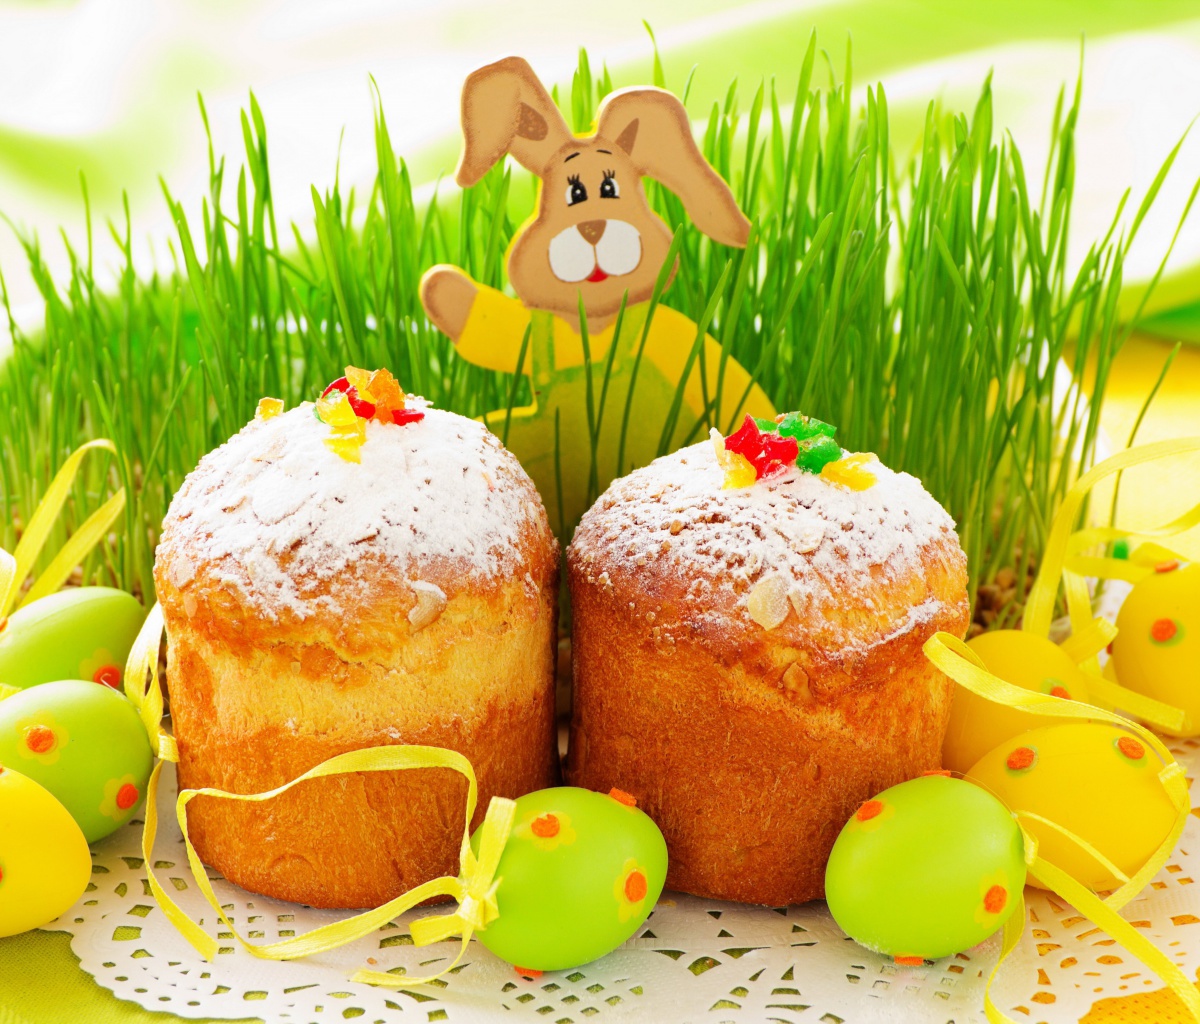 Das Easter Wish and Eggs Wallpaper 1200x1024